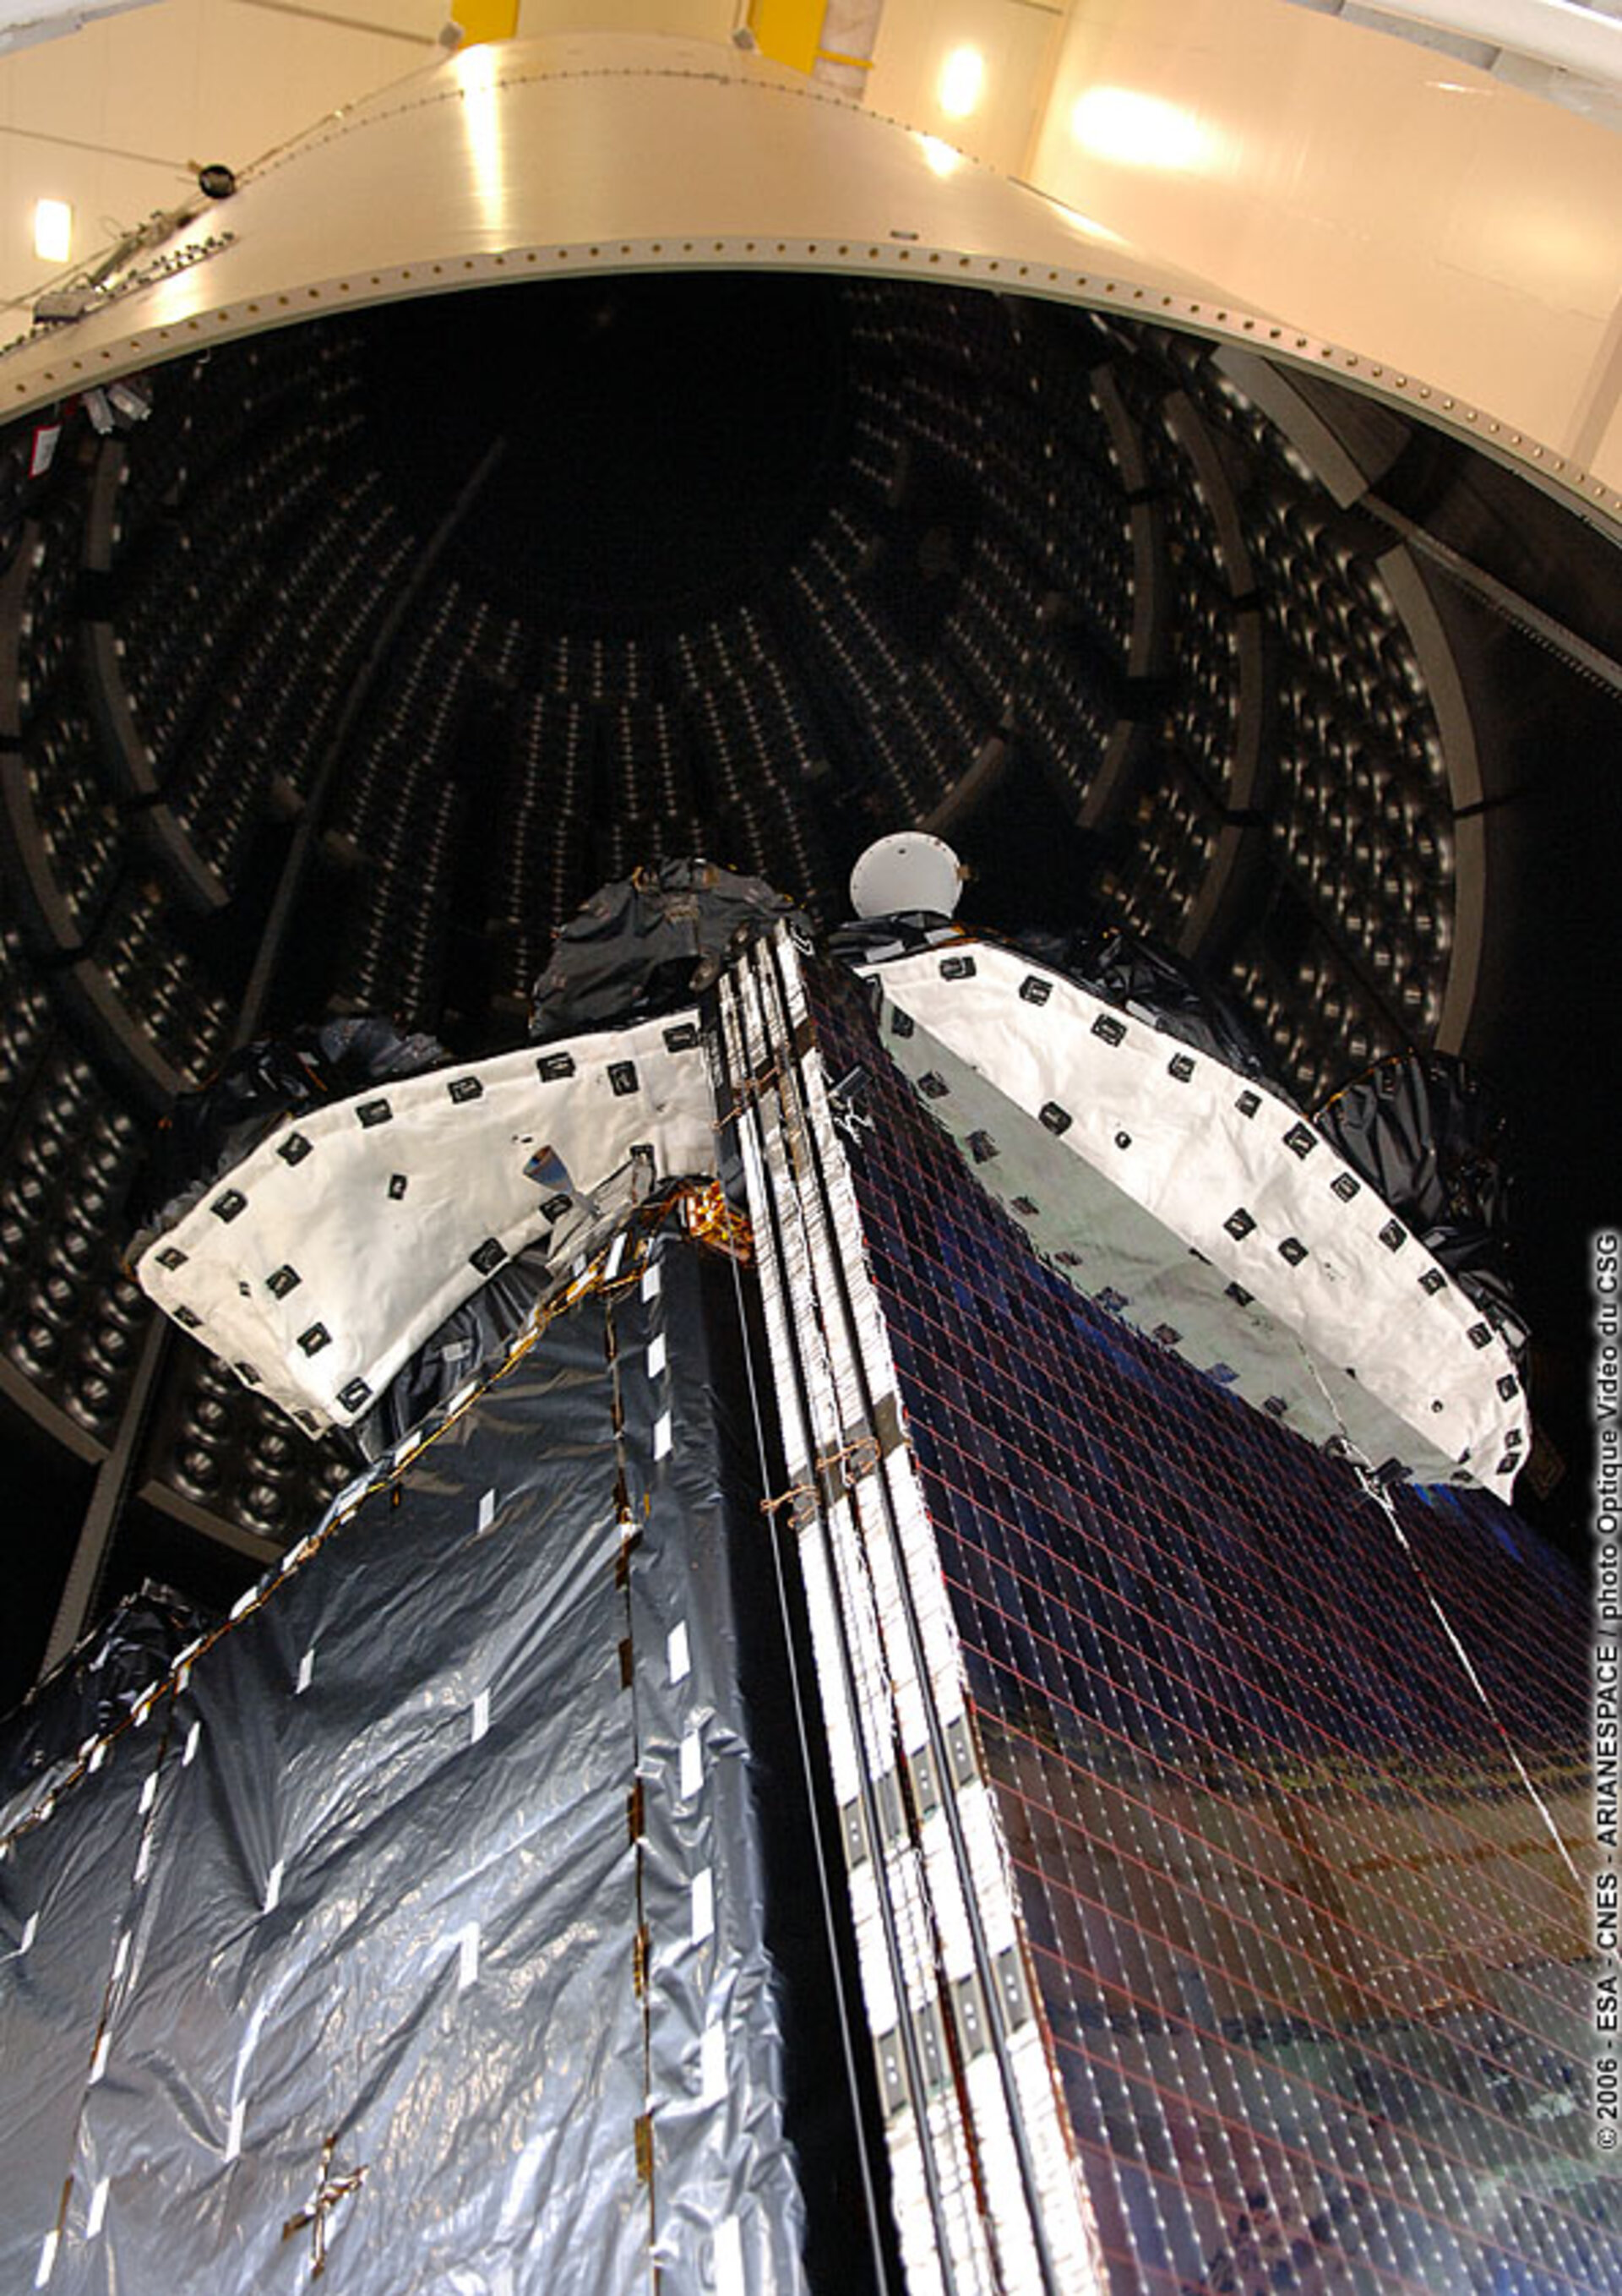 The SPAINSAT satellite is encapsulated on top of the Ariane 5 launcher